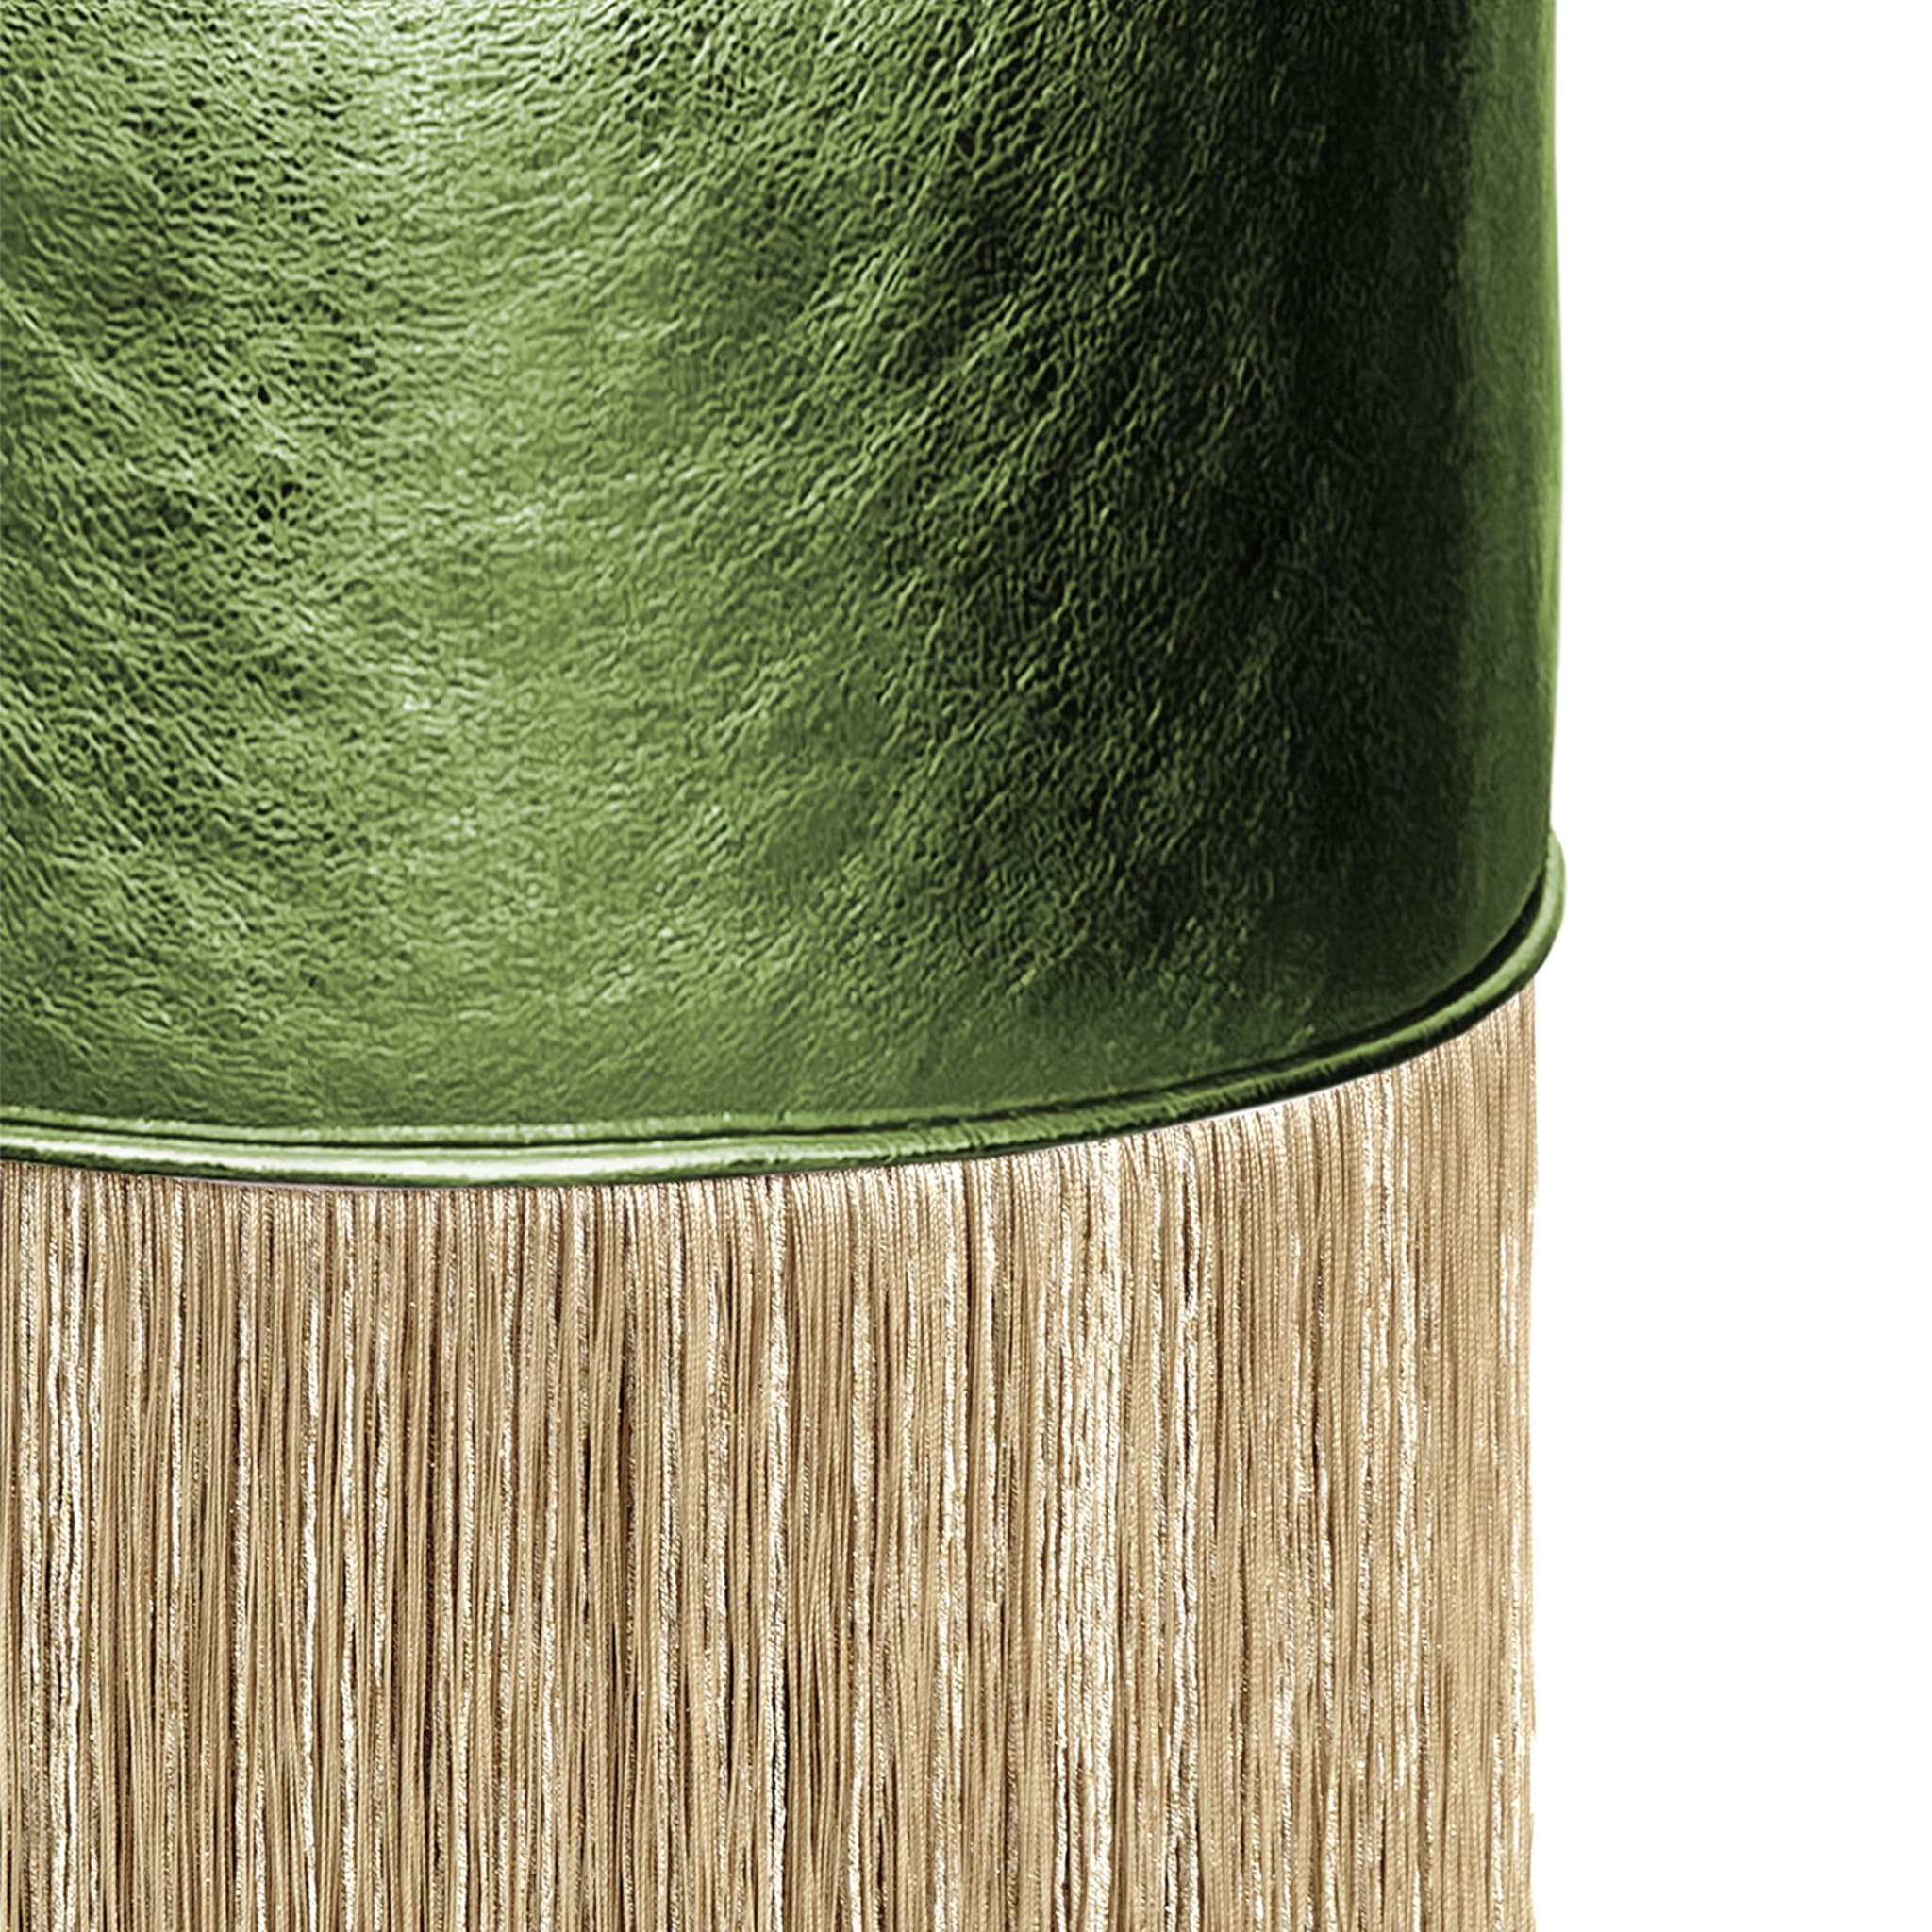 Gleaming Green Leather Gold Fringes Pouf by Lorenza Bozzoli - Alternative view 1